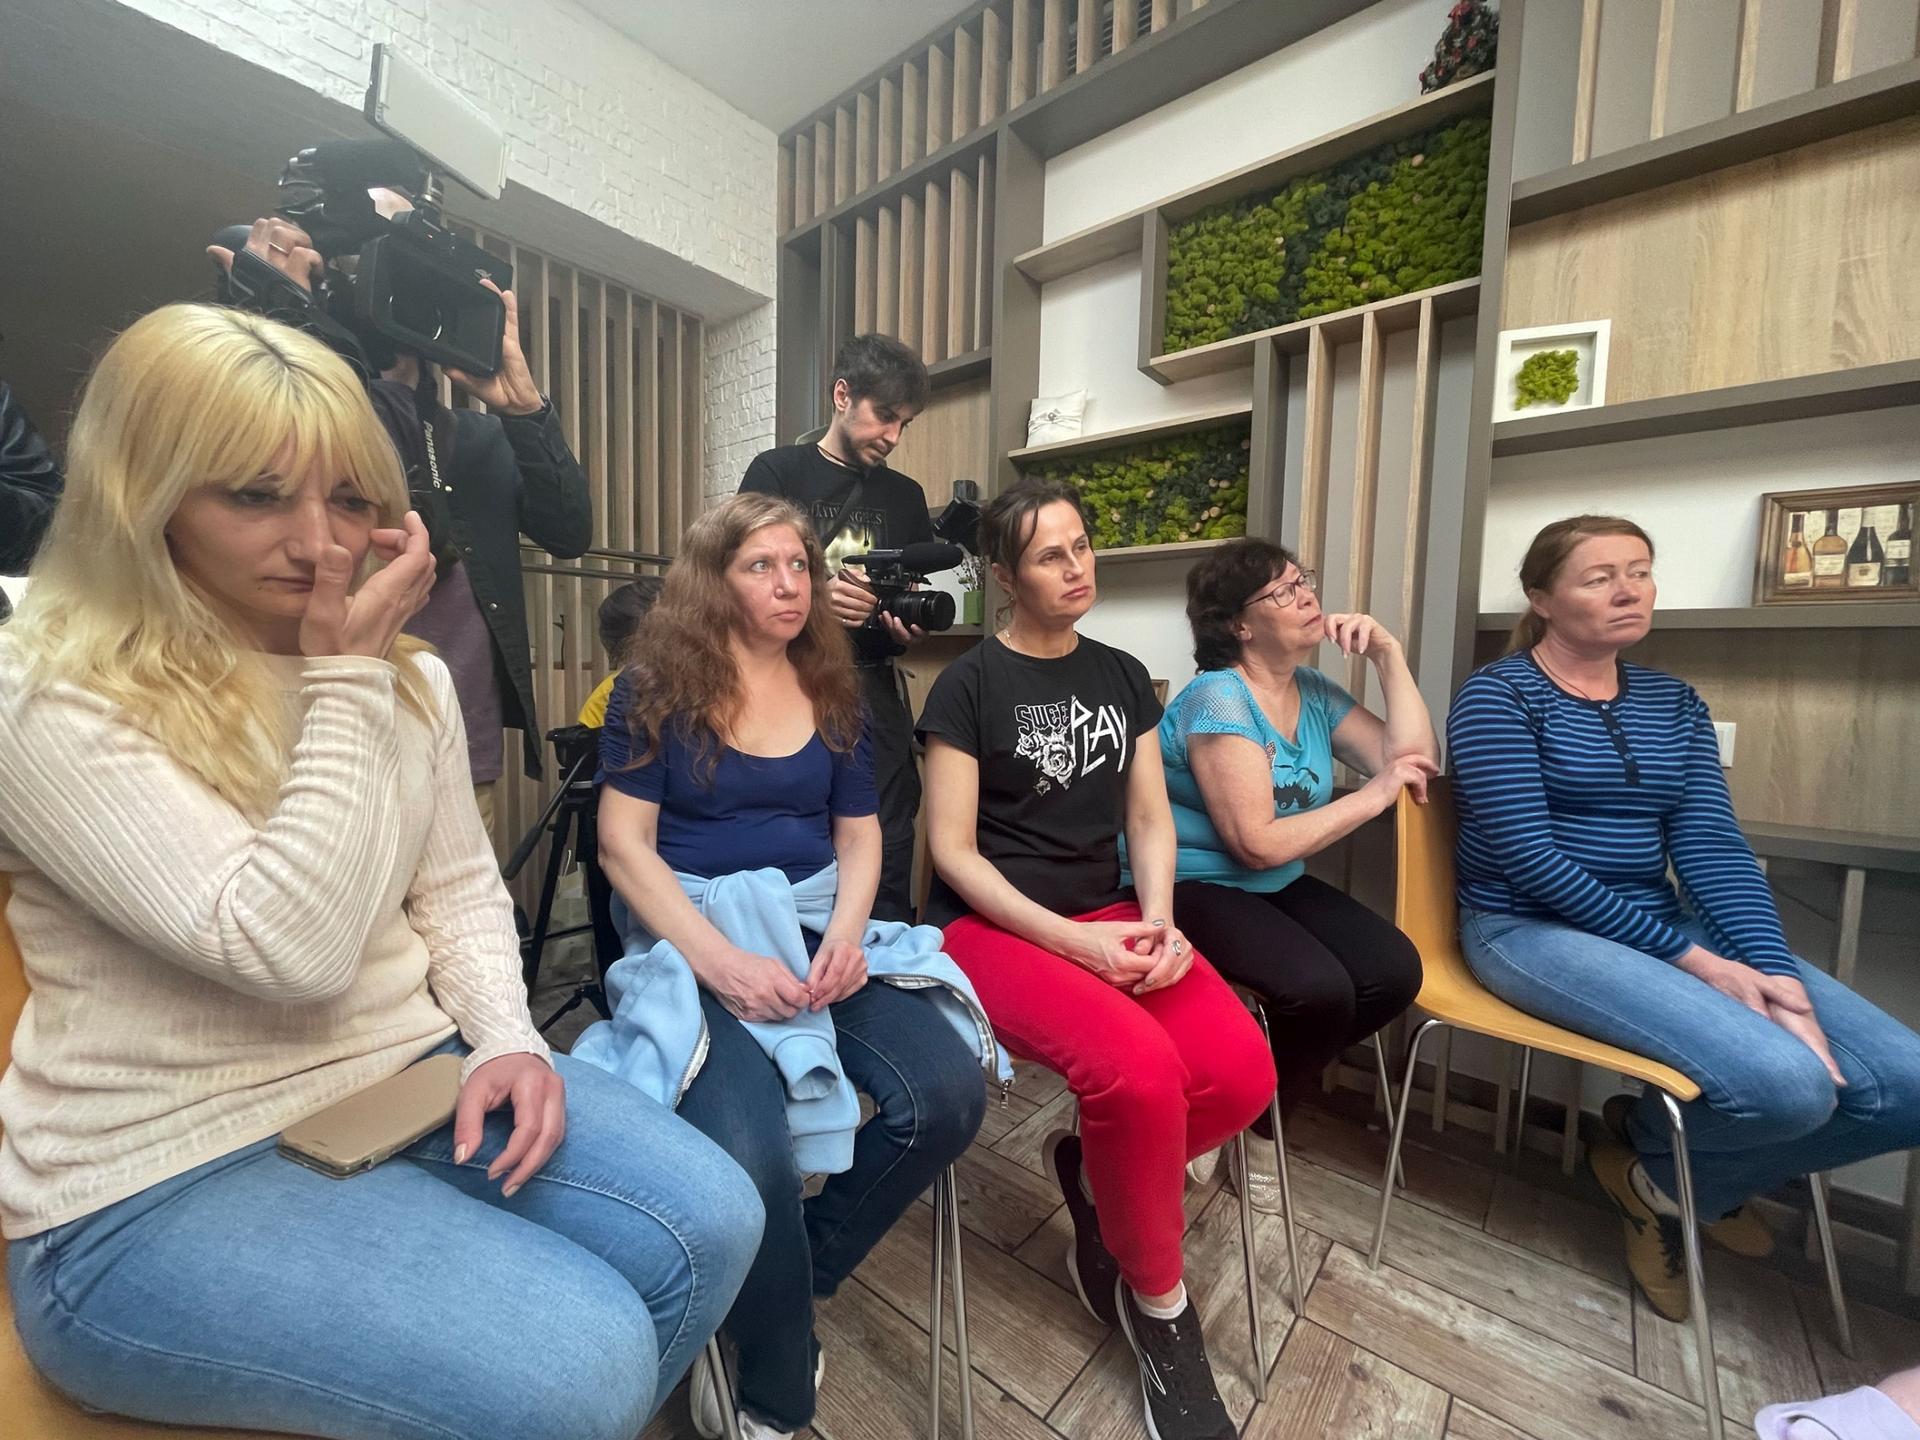 Ukrainian authorities say at least 19,000 children have been transferred to Russia during the war. These moms and guardians are on a mission to retrieve them.